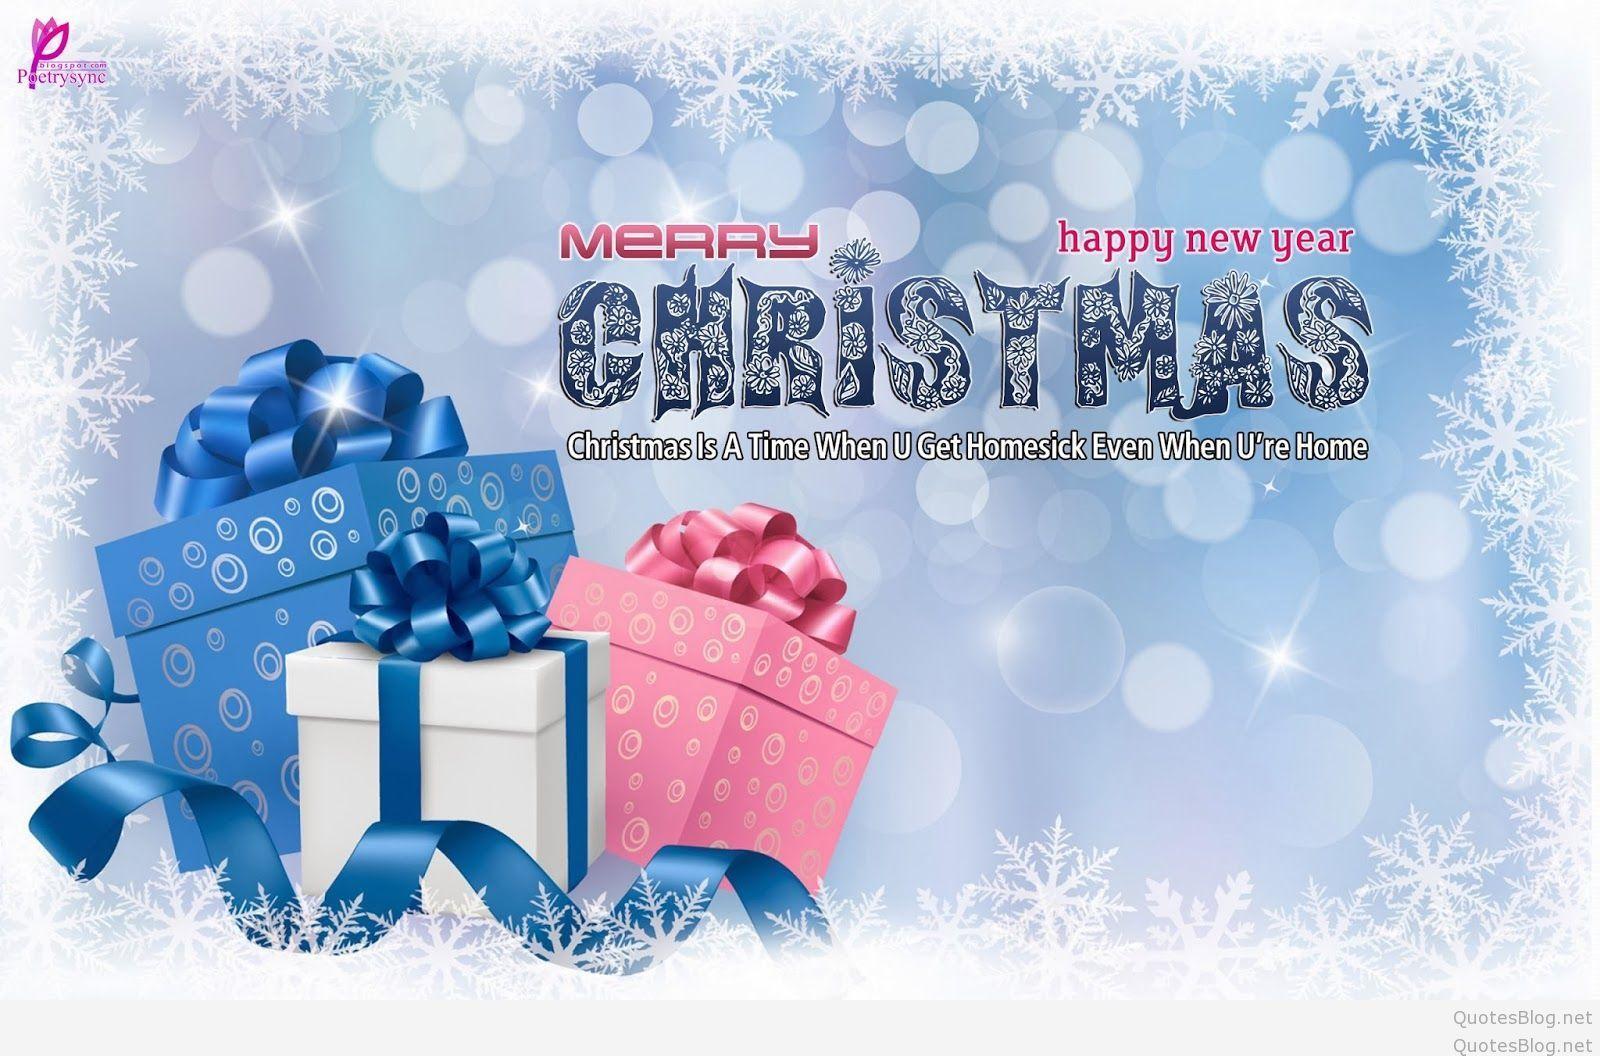 Best Happy St Nicholas Wishes & Merry Christmas cards 2015